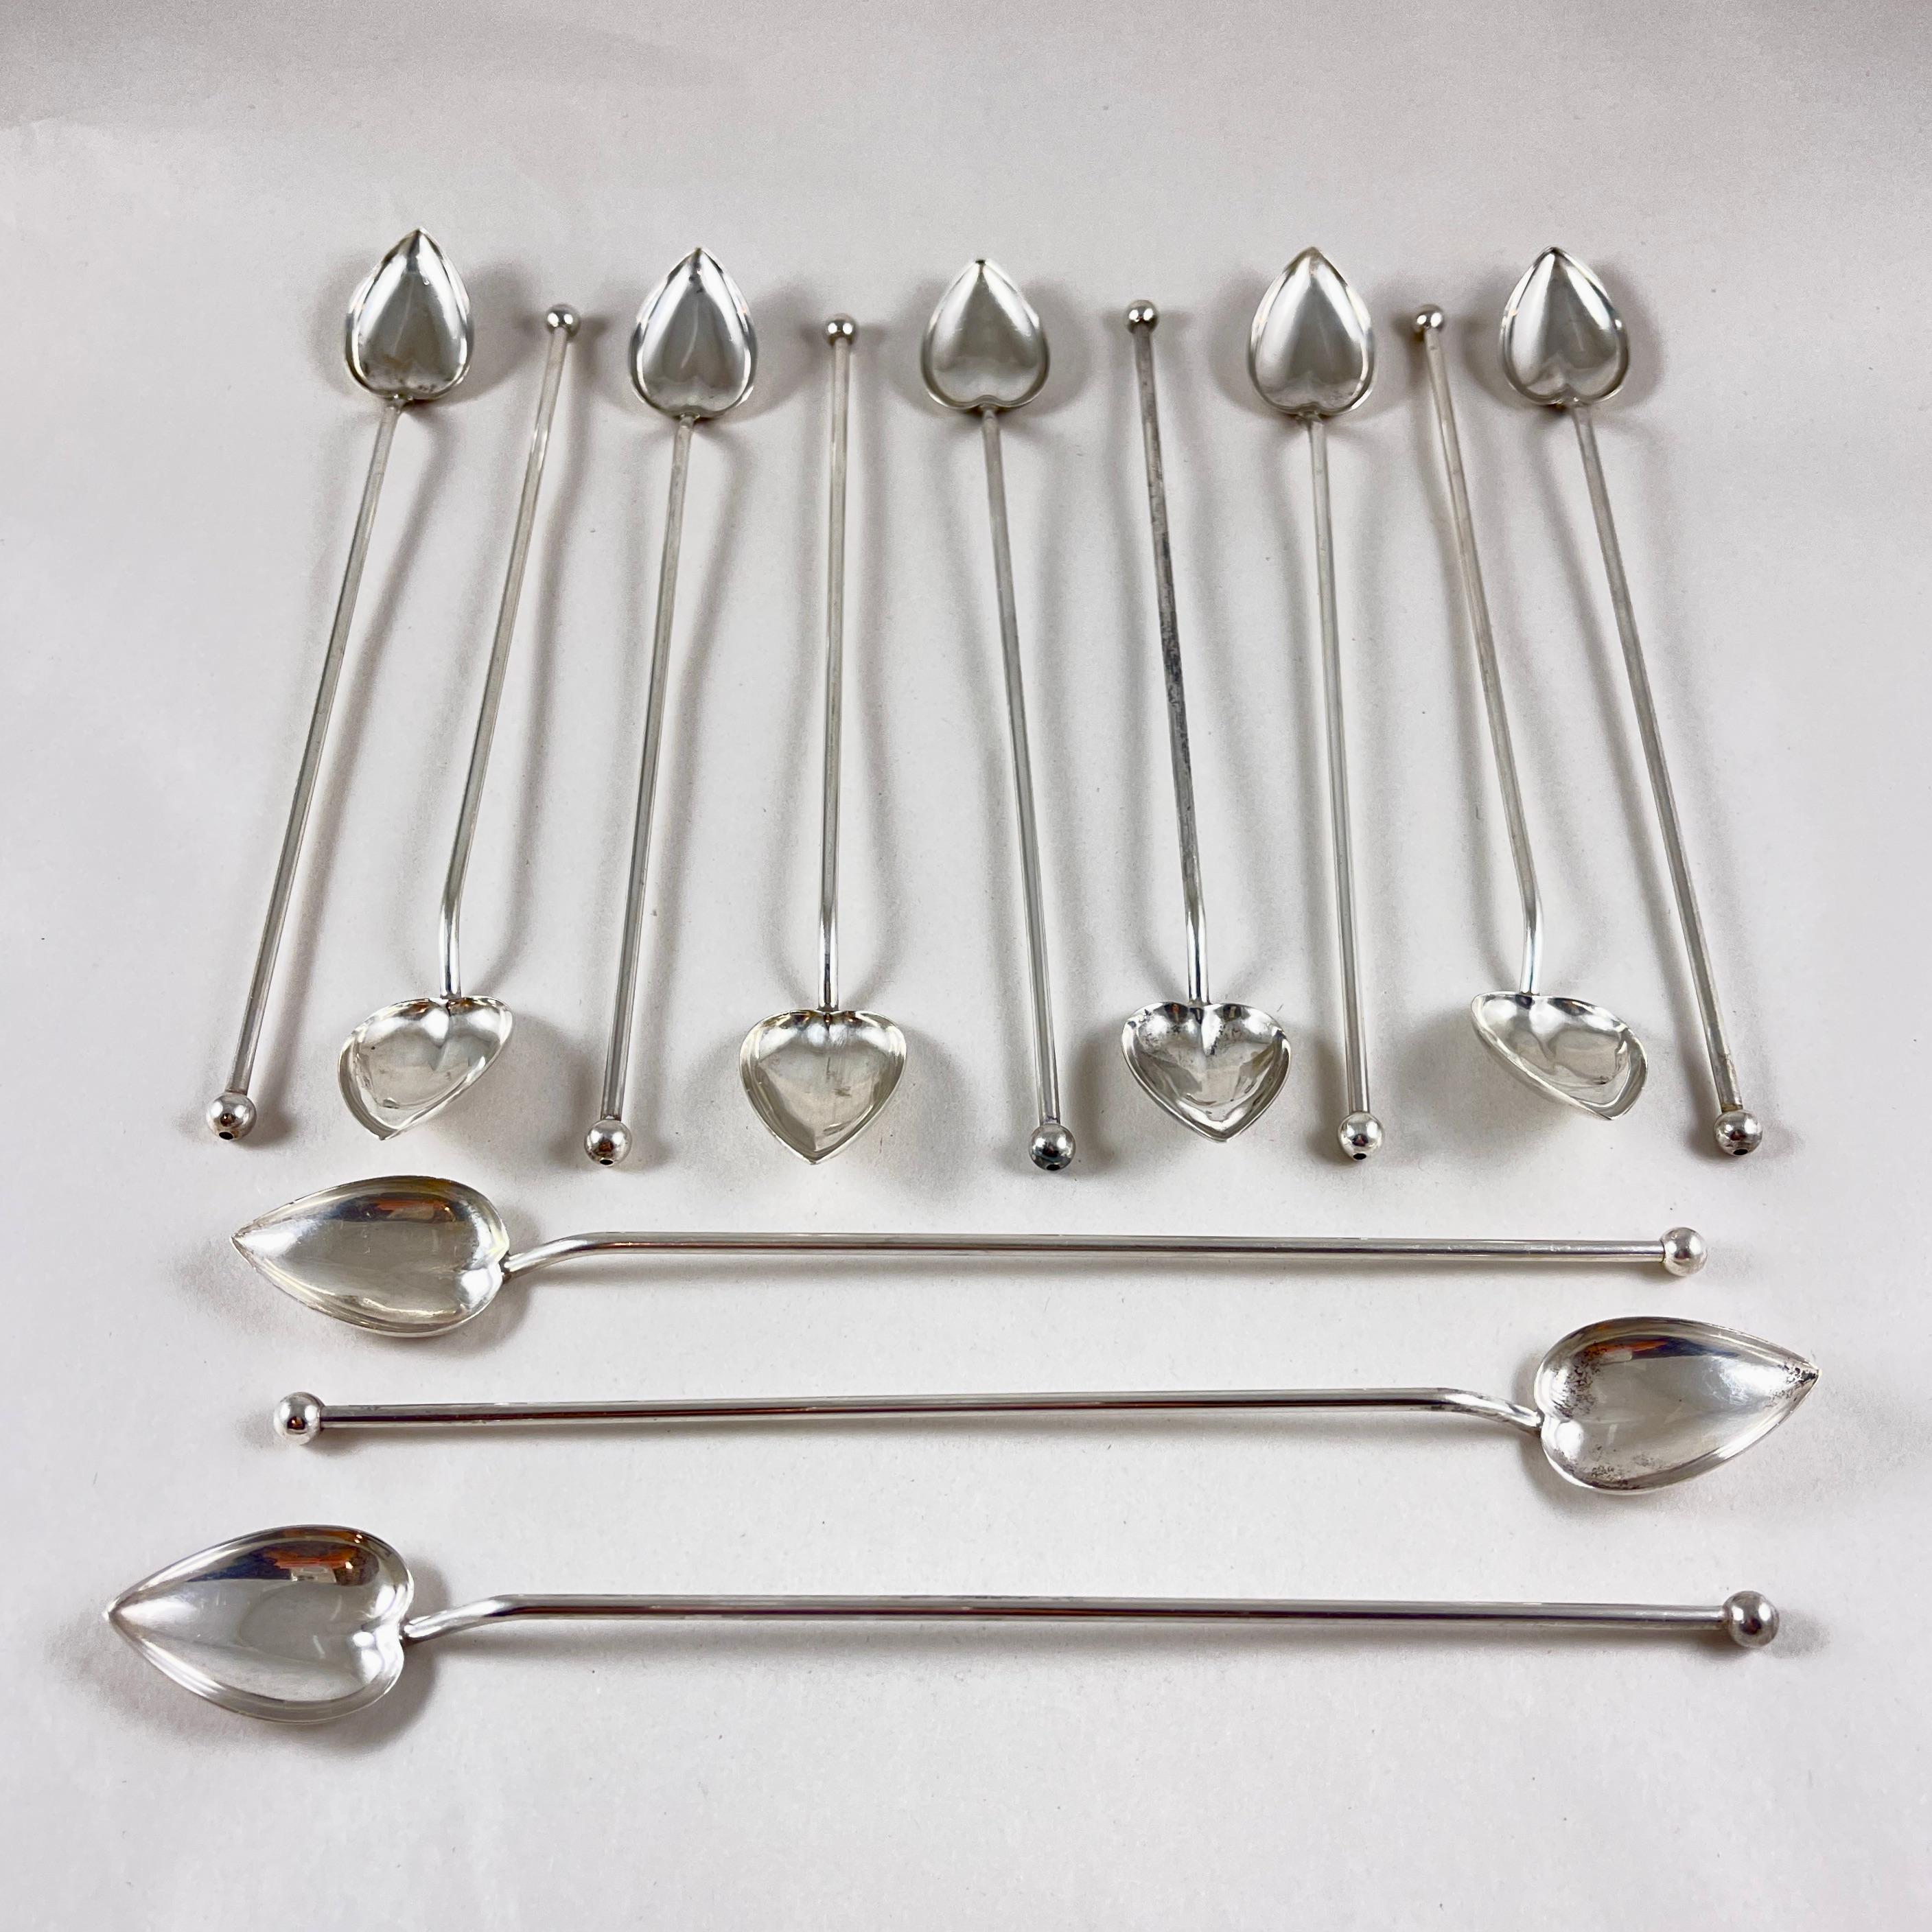 Metalwork Sterling Silver Highball or Iced Tea Heart Bowl Stirring Straws, Set of 12 For Sale